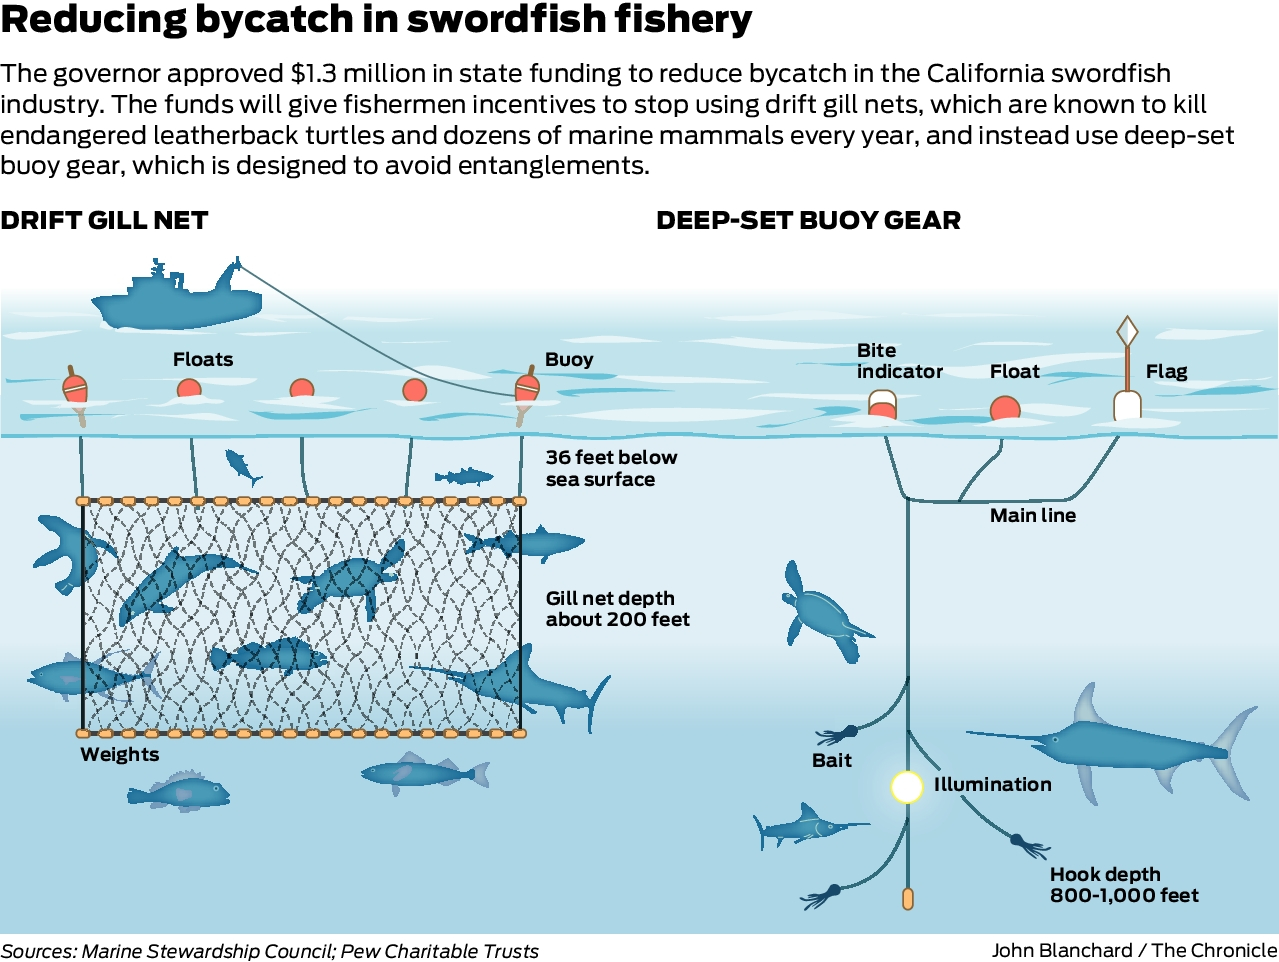 California puts up $1.3 million to phase out swordfish nets that can kill  sea turtles and whales